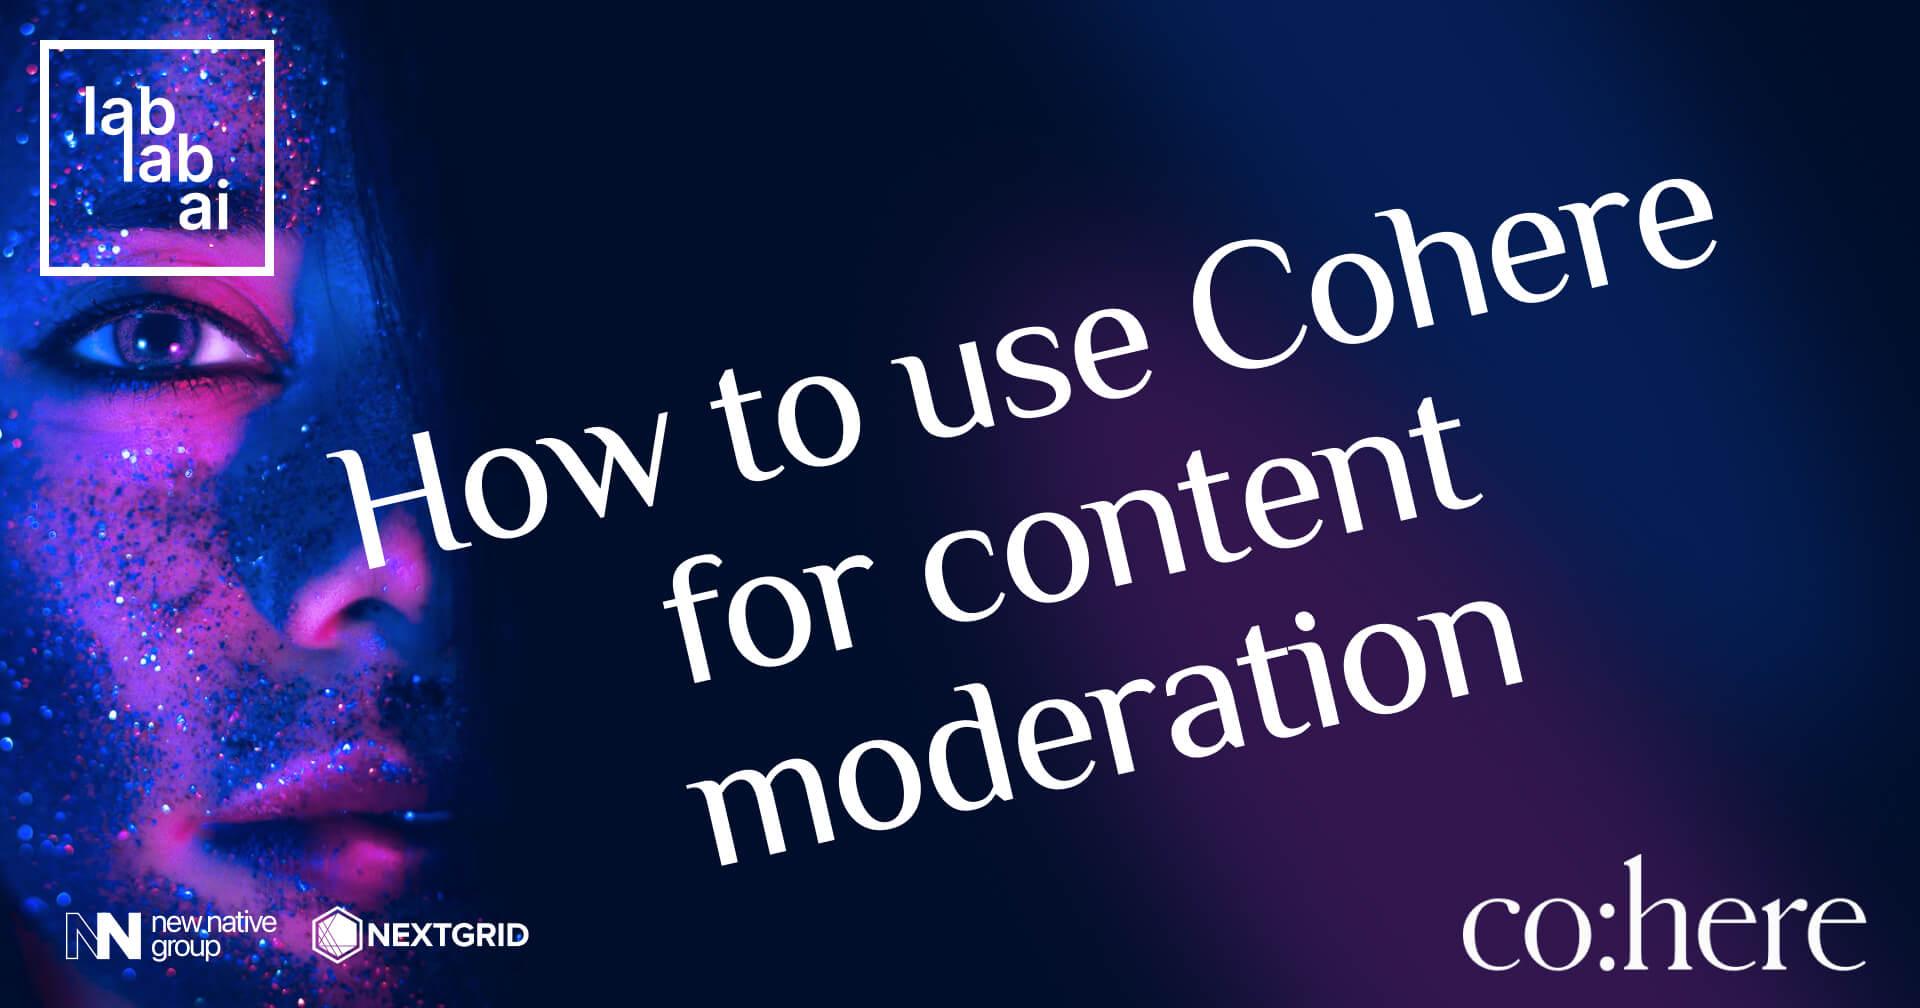 Cohere tutorial: How to use Cohere for content moderation tutorial